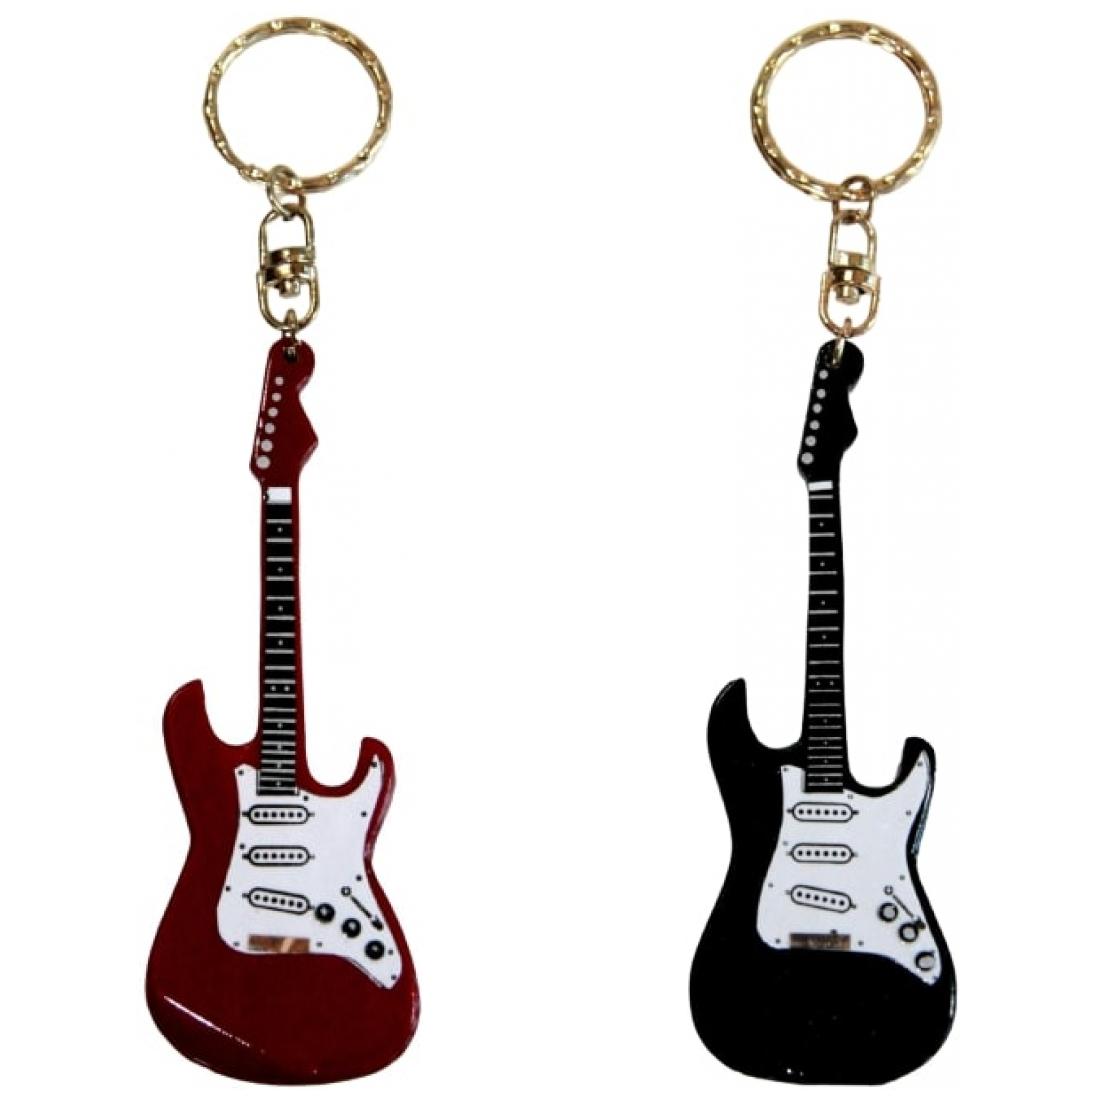 Fender-Keychain, electric guitar, red or black